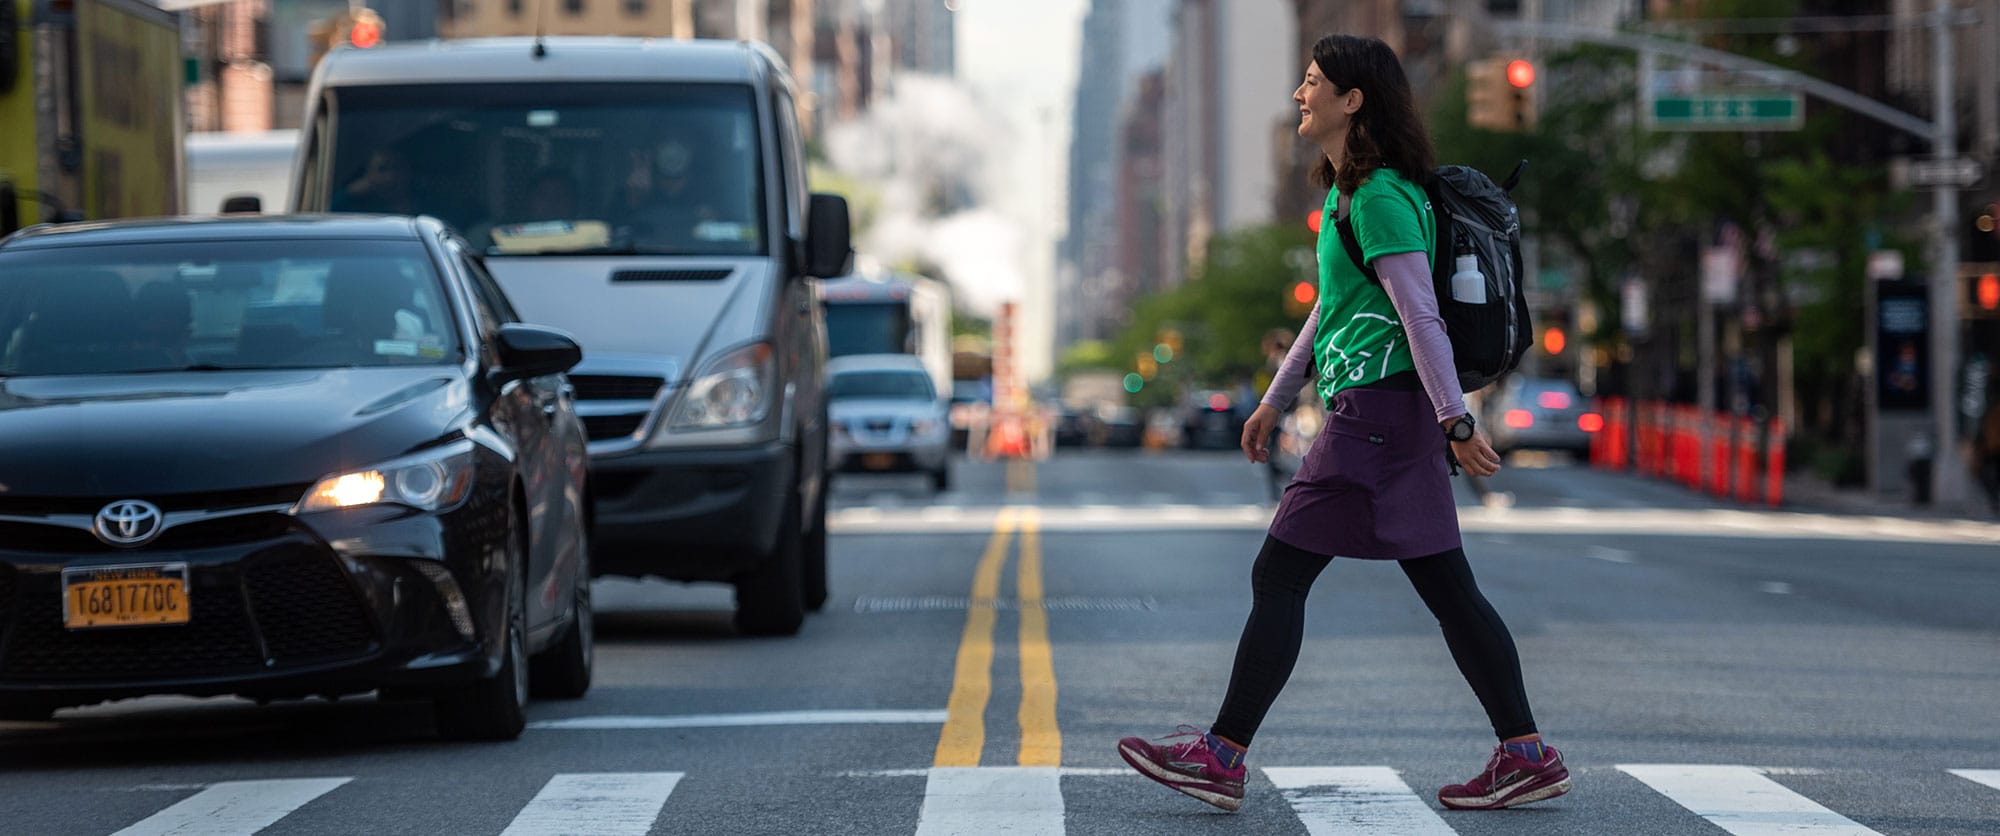 A woman is crossing the street in front of a car.